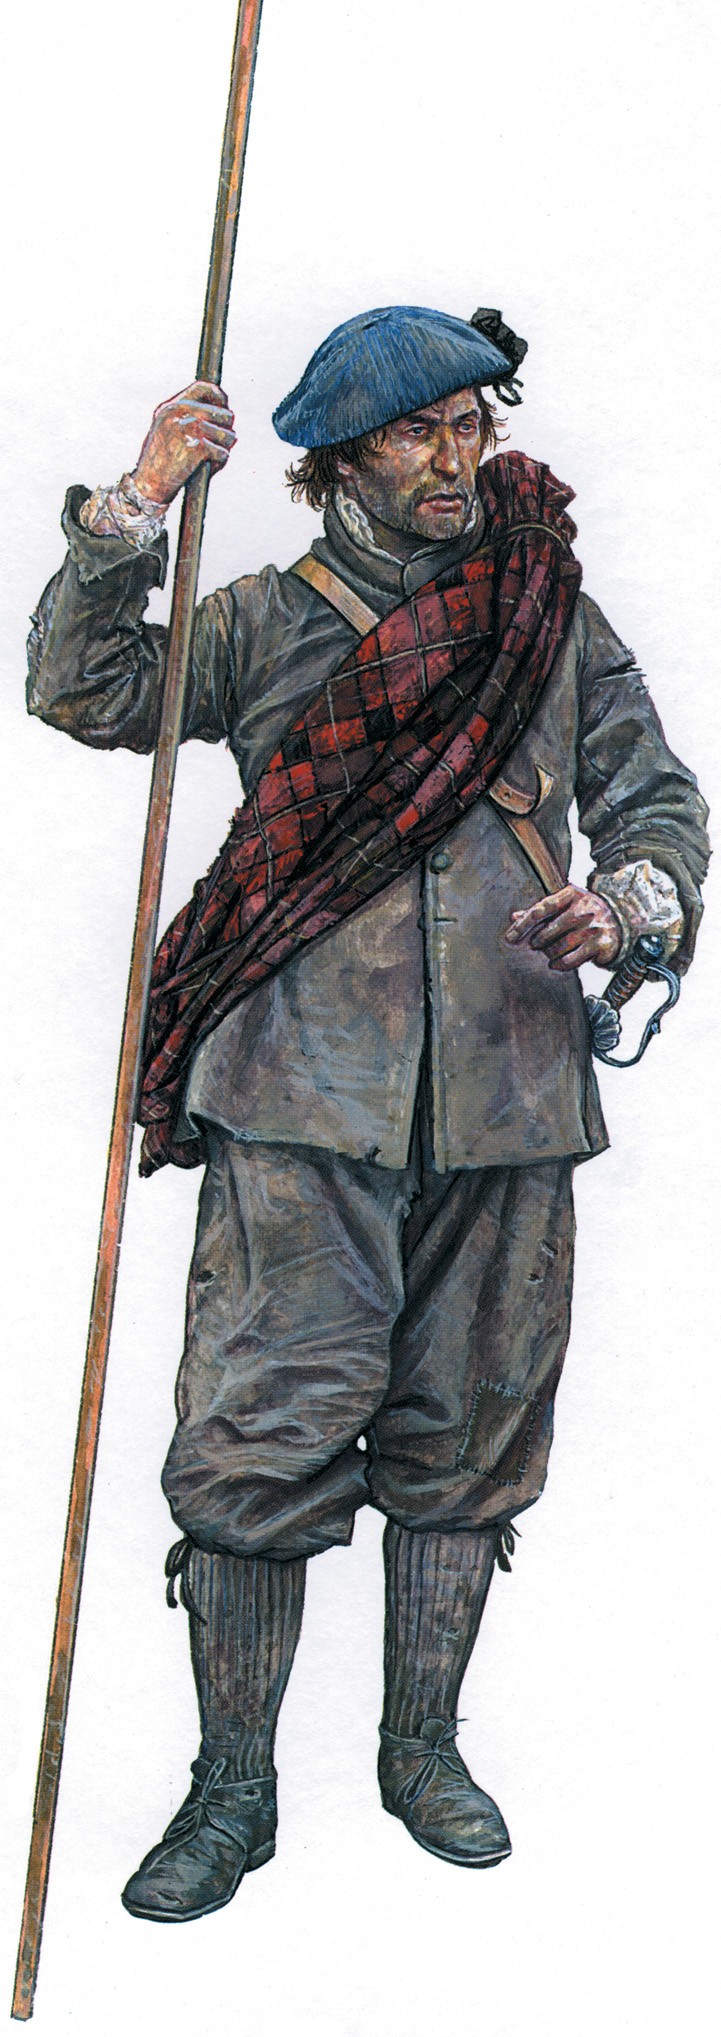 A pikeman, wearing a Scottish bonnet and armed with a 16 foot pike and a sword.